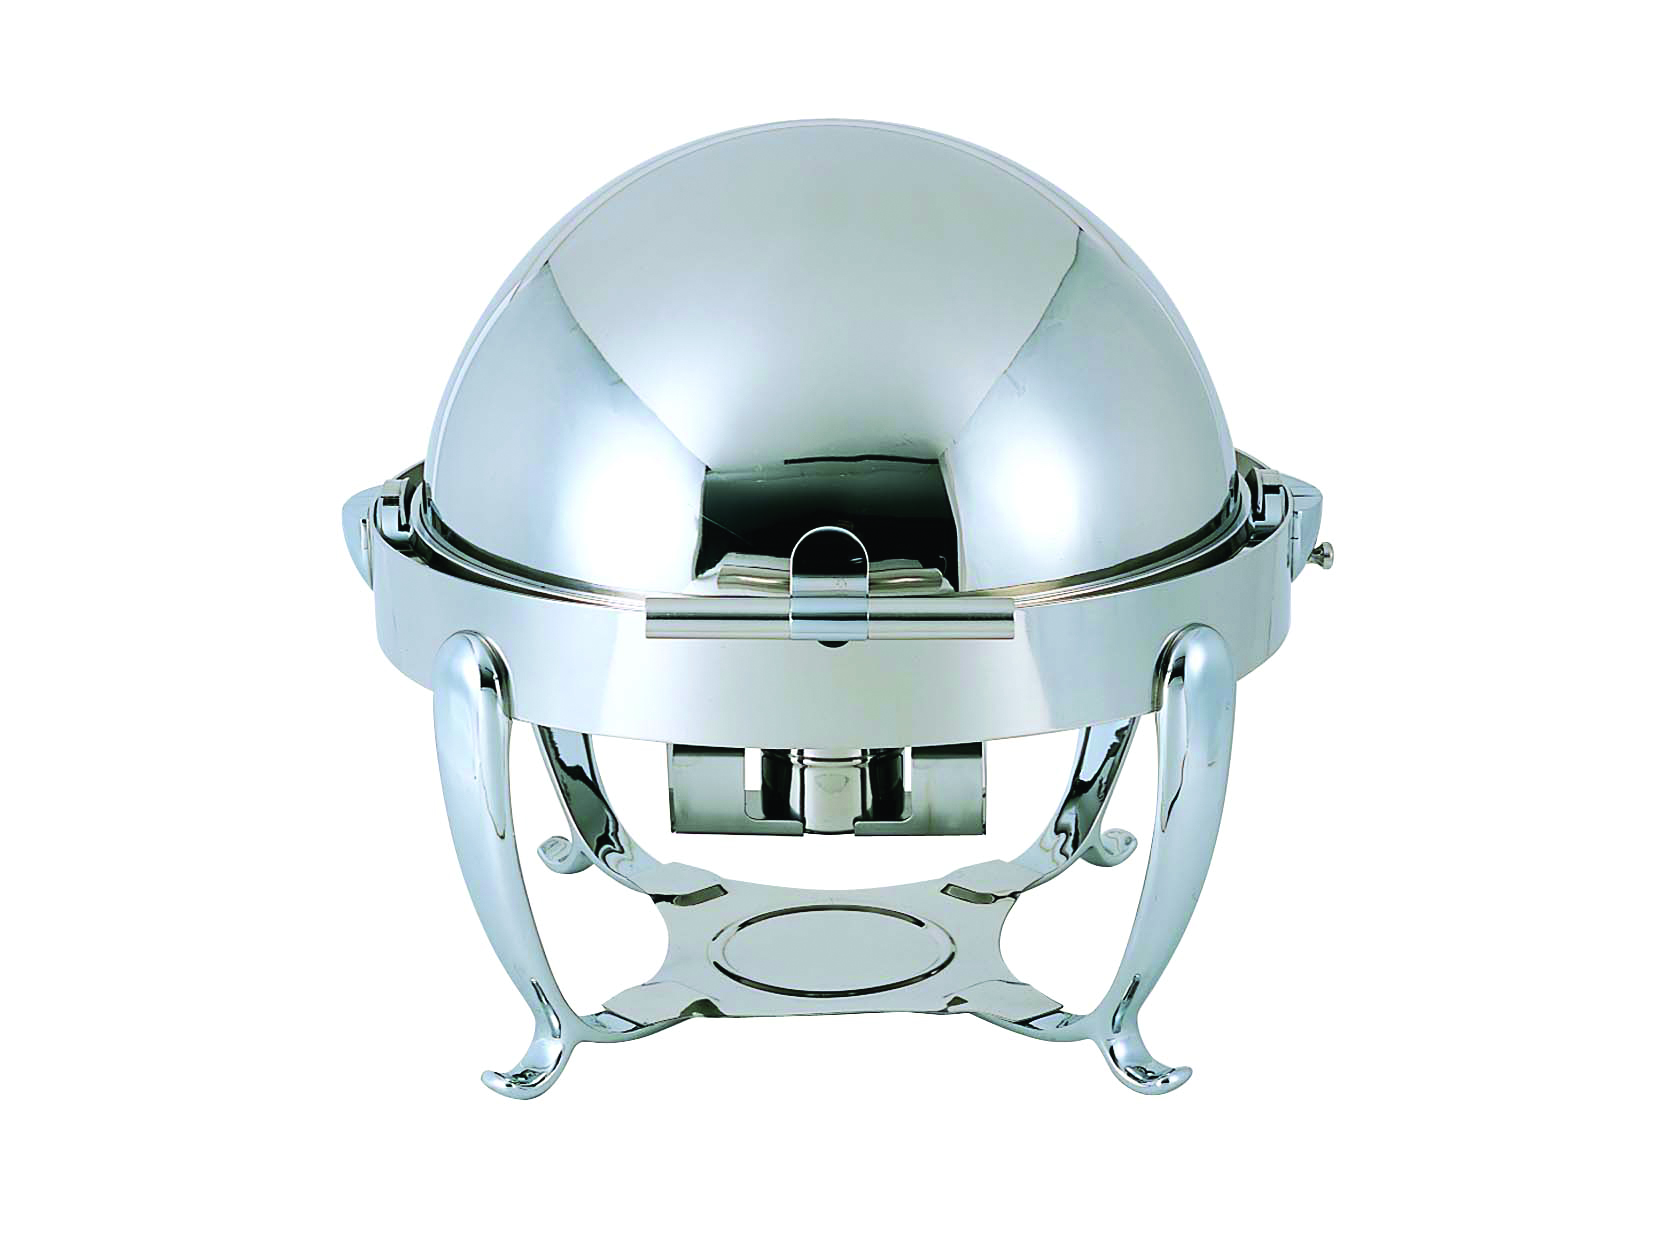 MEPRA Chafing-dish RollTop 207201